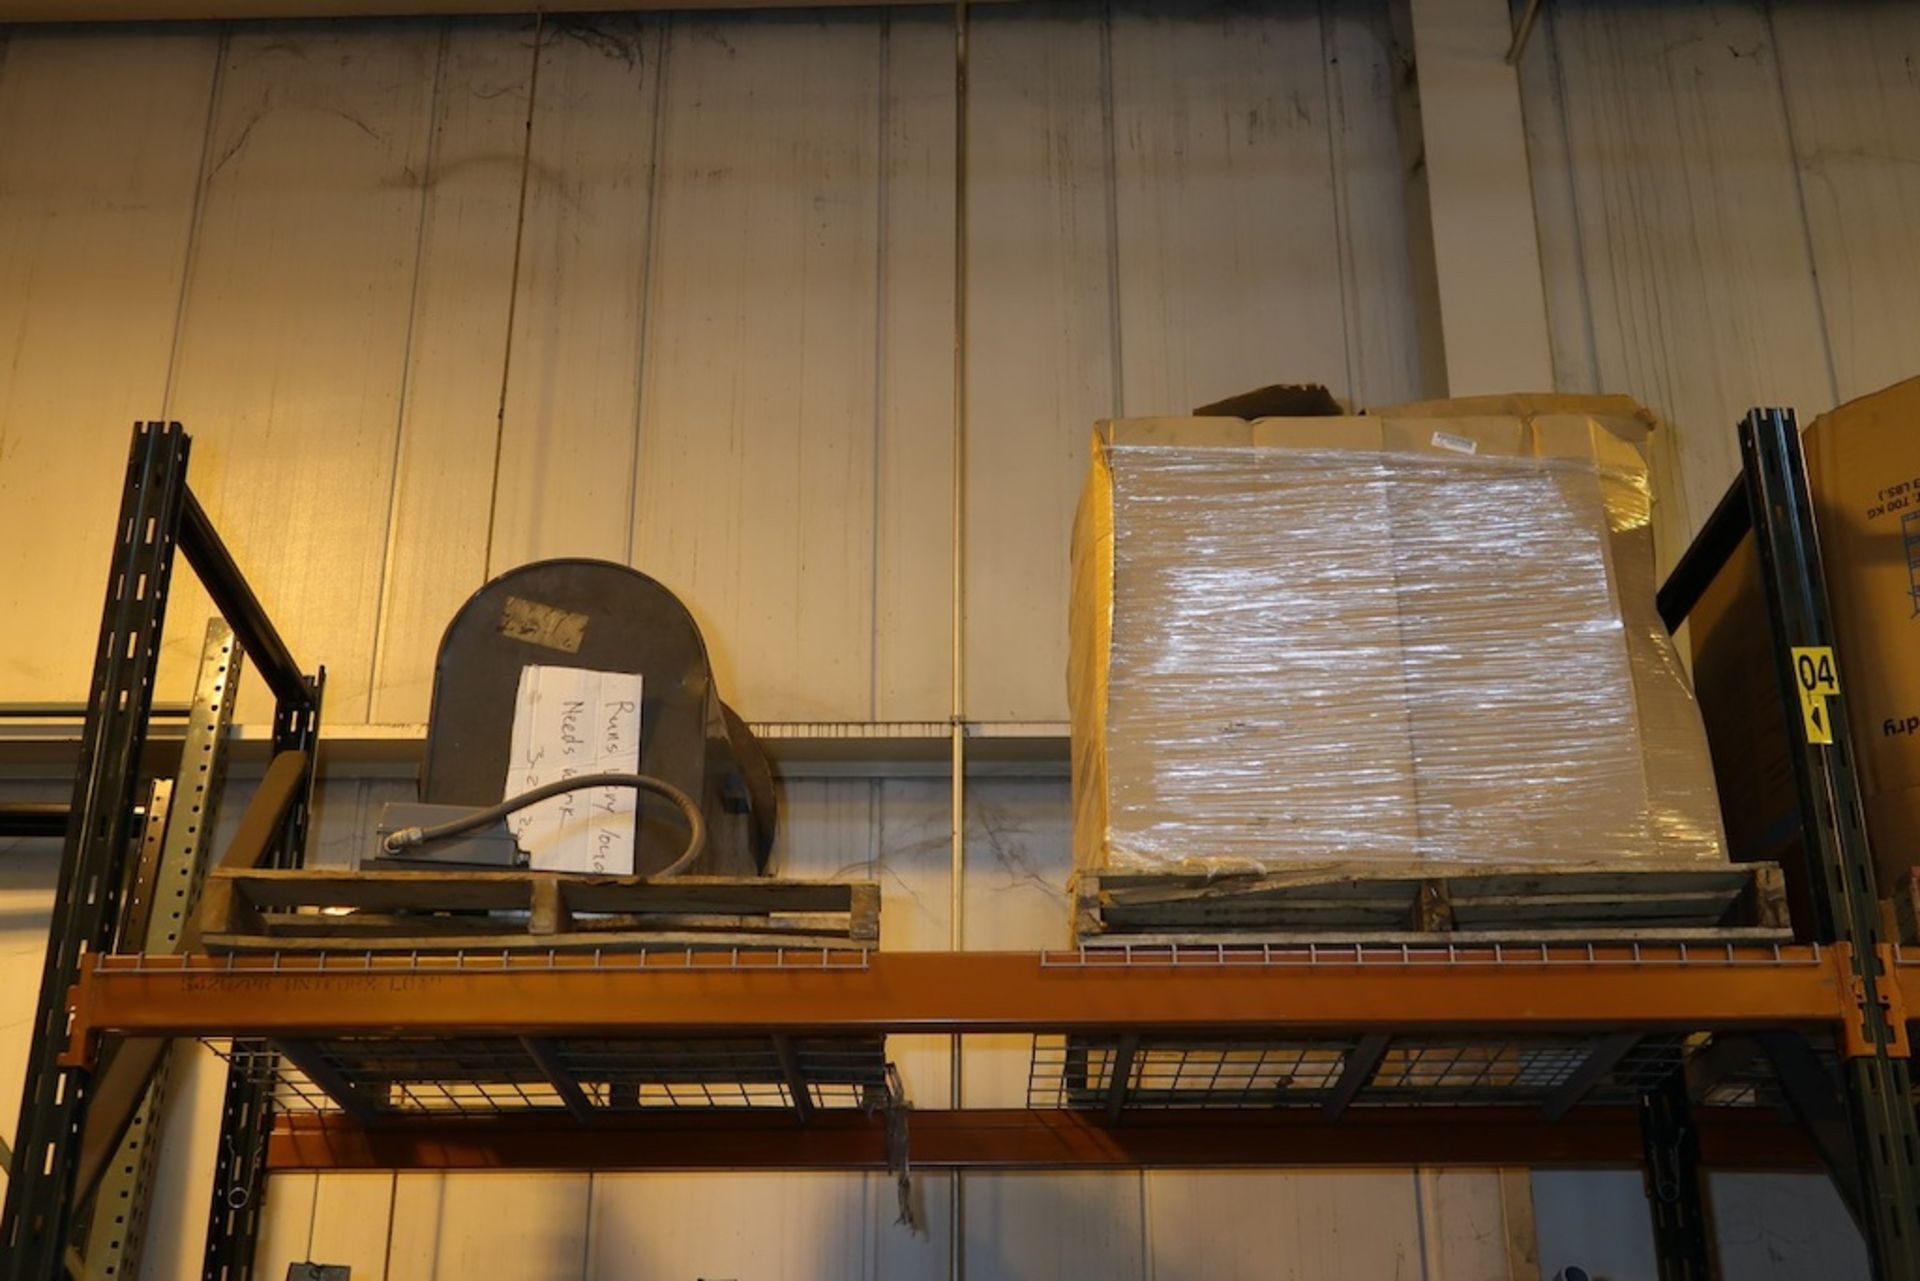 Contents of (1) Sections of Pallet Racking, Including Misc. Machine Parts, Extruder Barrels, Pump, E - Image 2 of 7